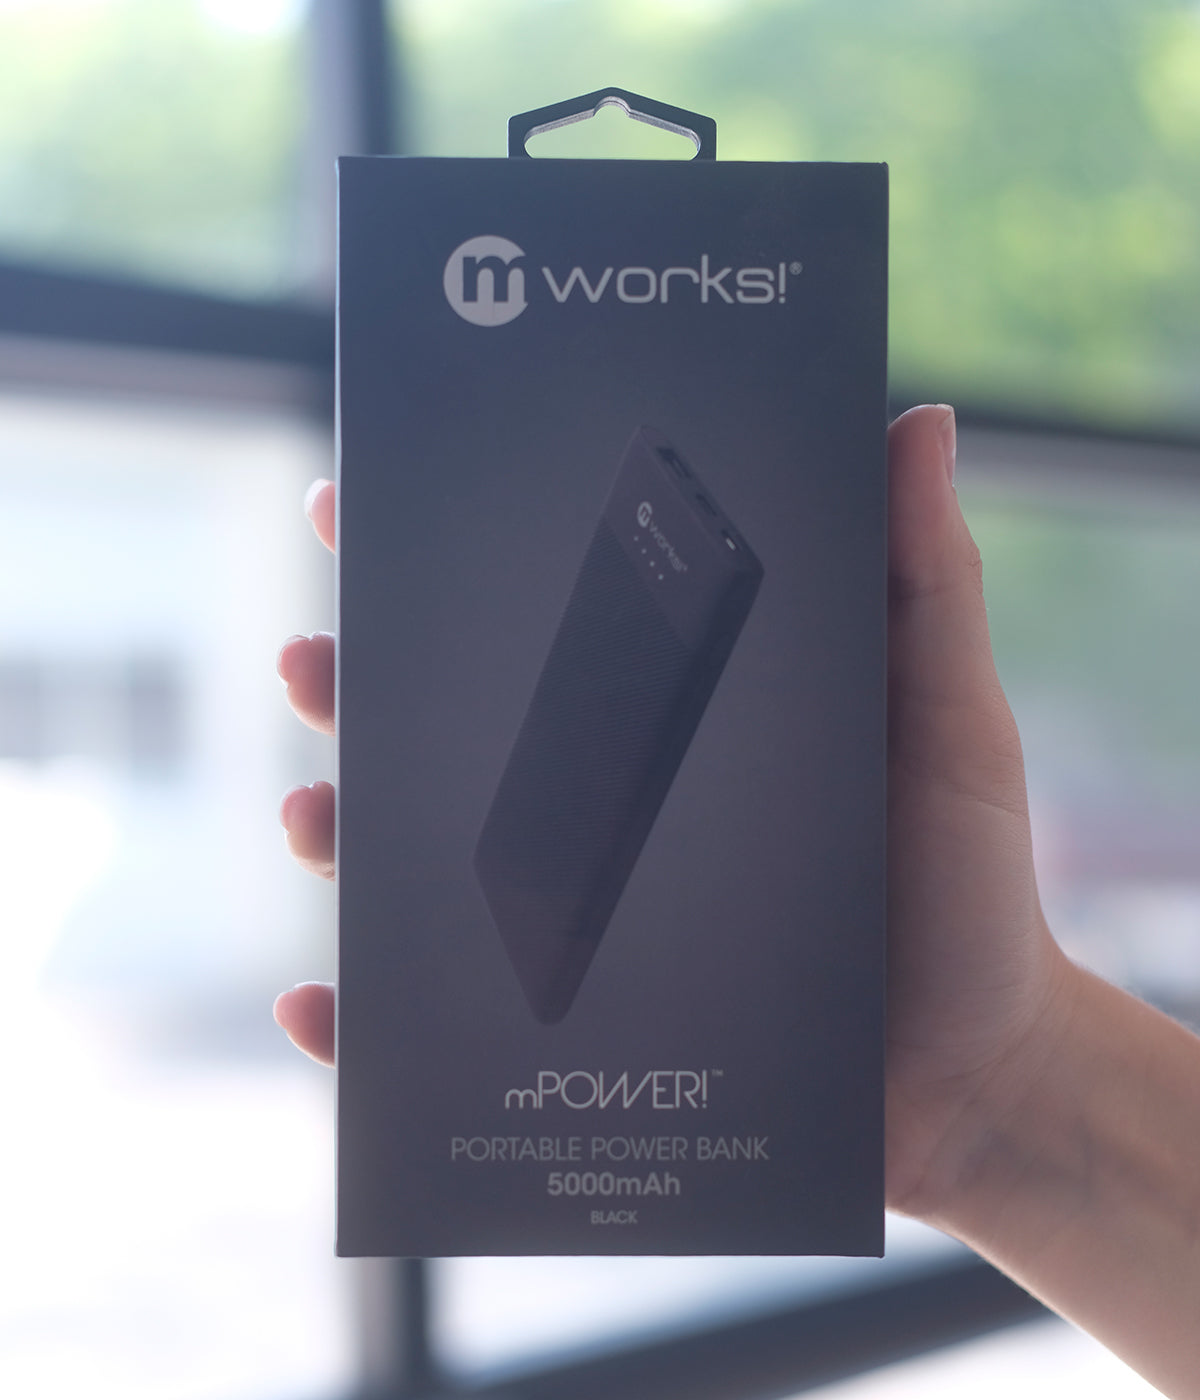 mworks! mPOWER! Portable Power Bank 5000mAh with Raised Rubber Ridges